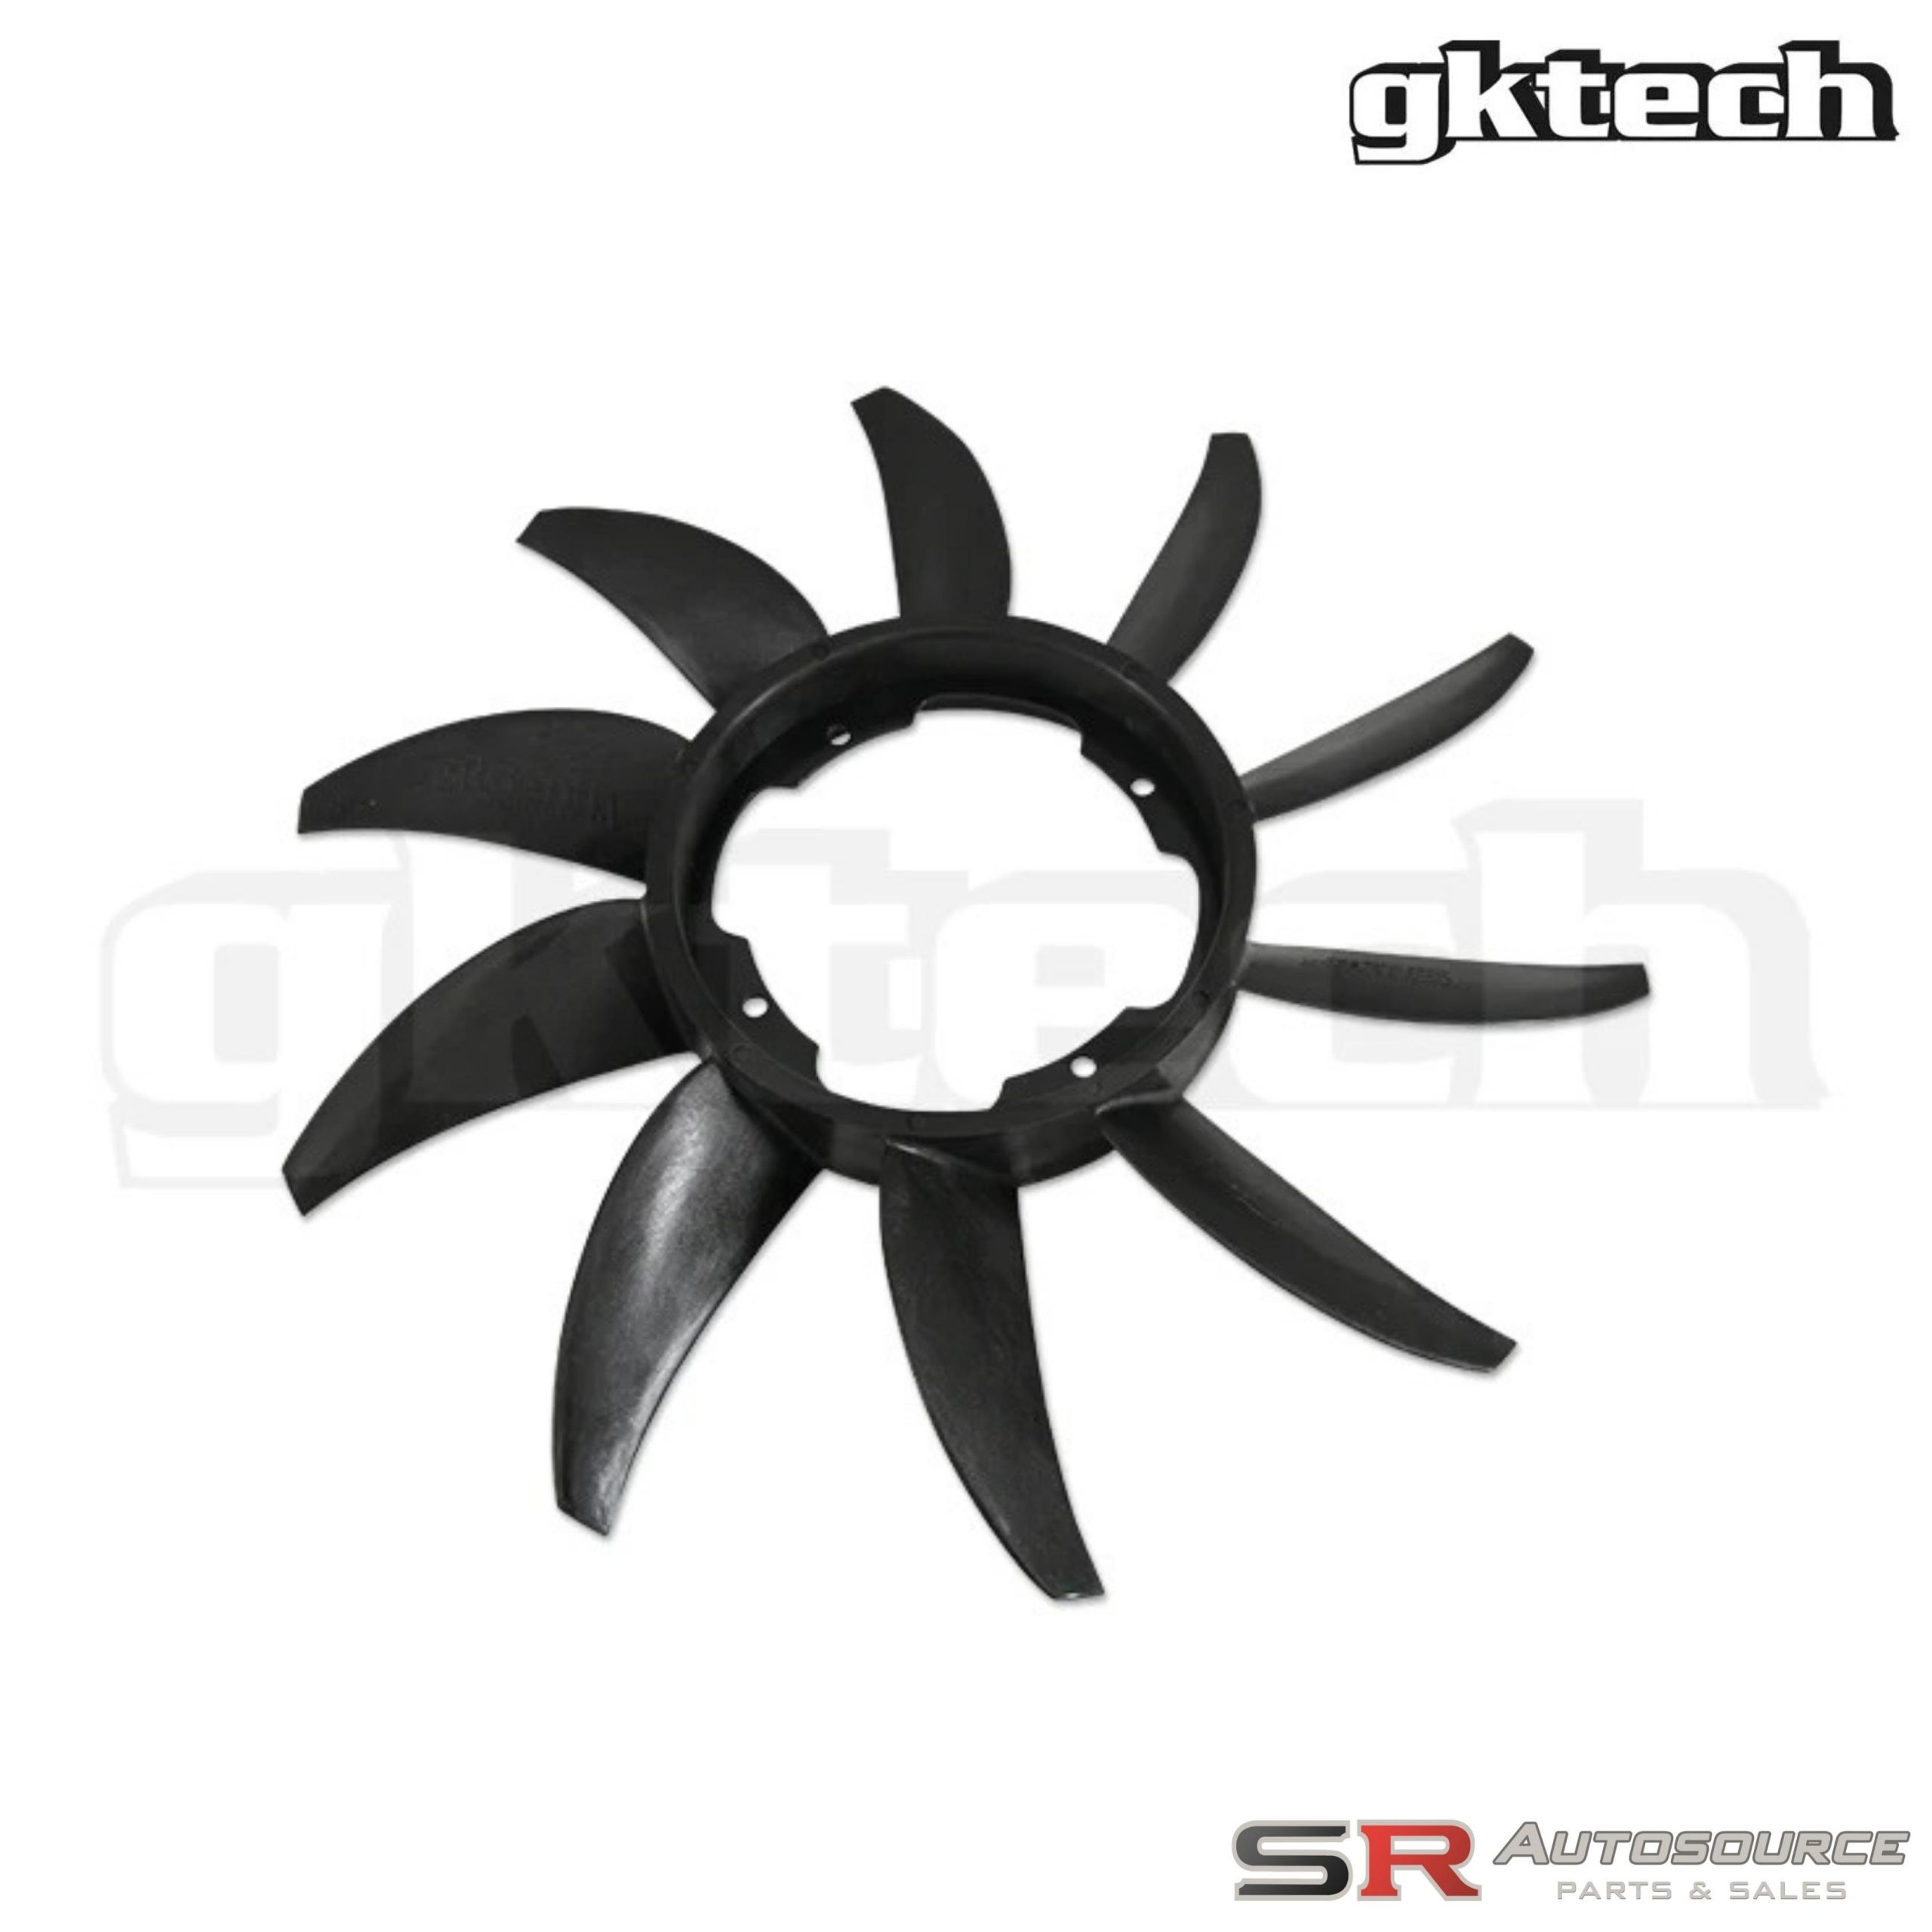 GK Tech RB Engine High Performance Engine Fan – 40% Improved Air Flow